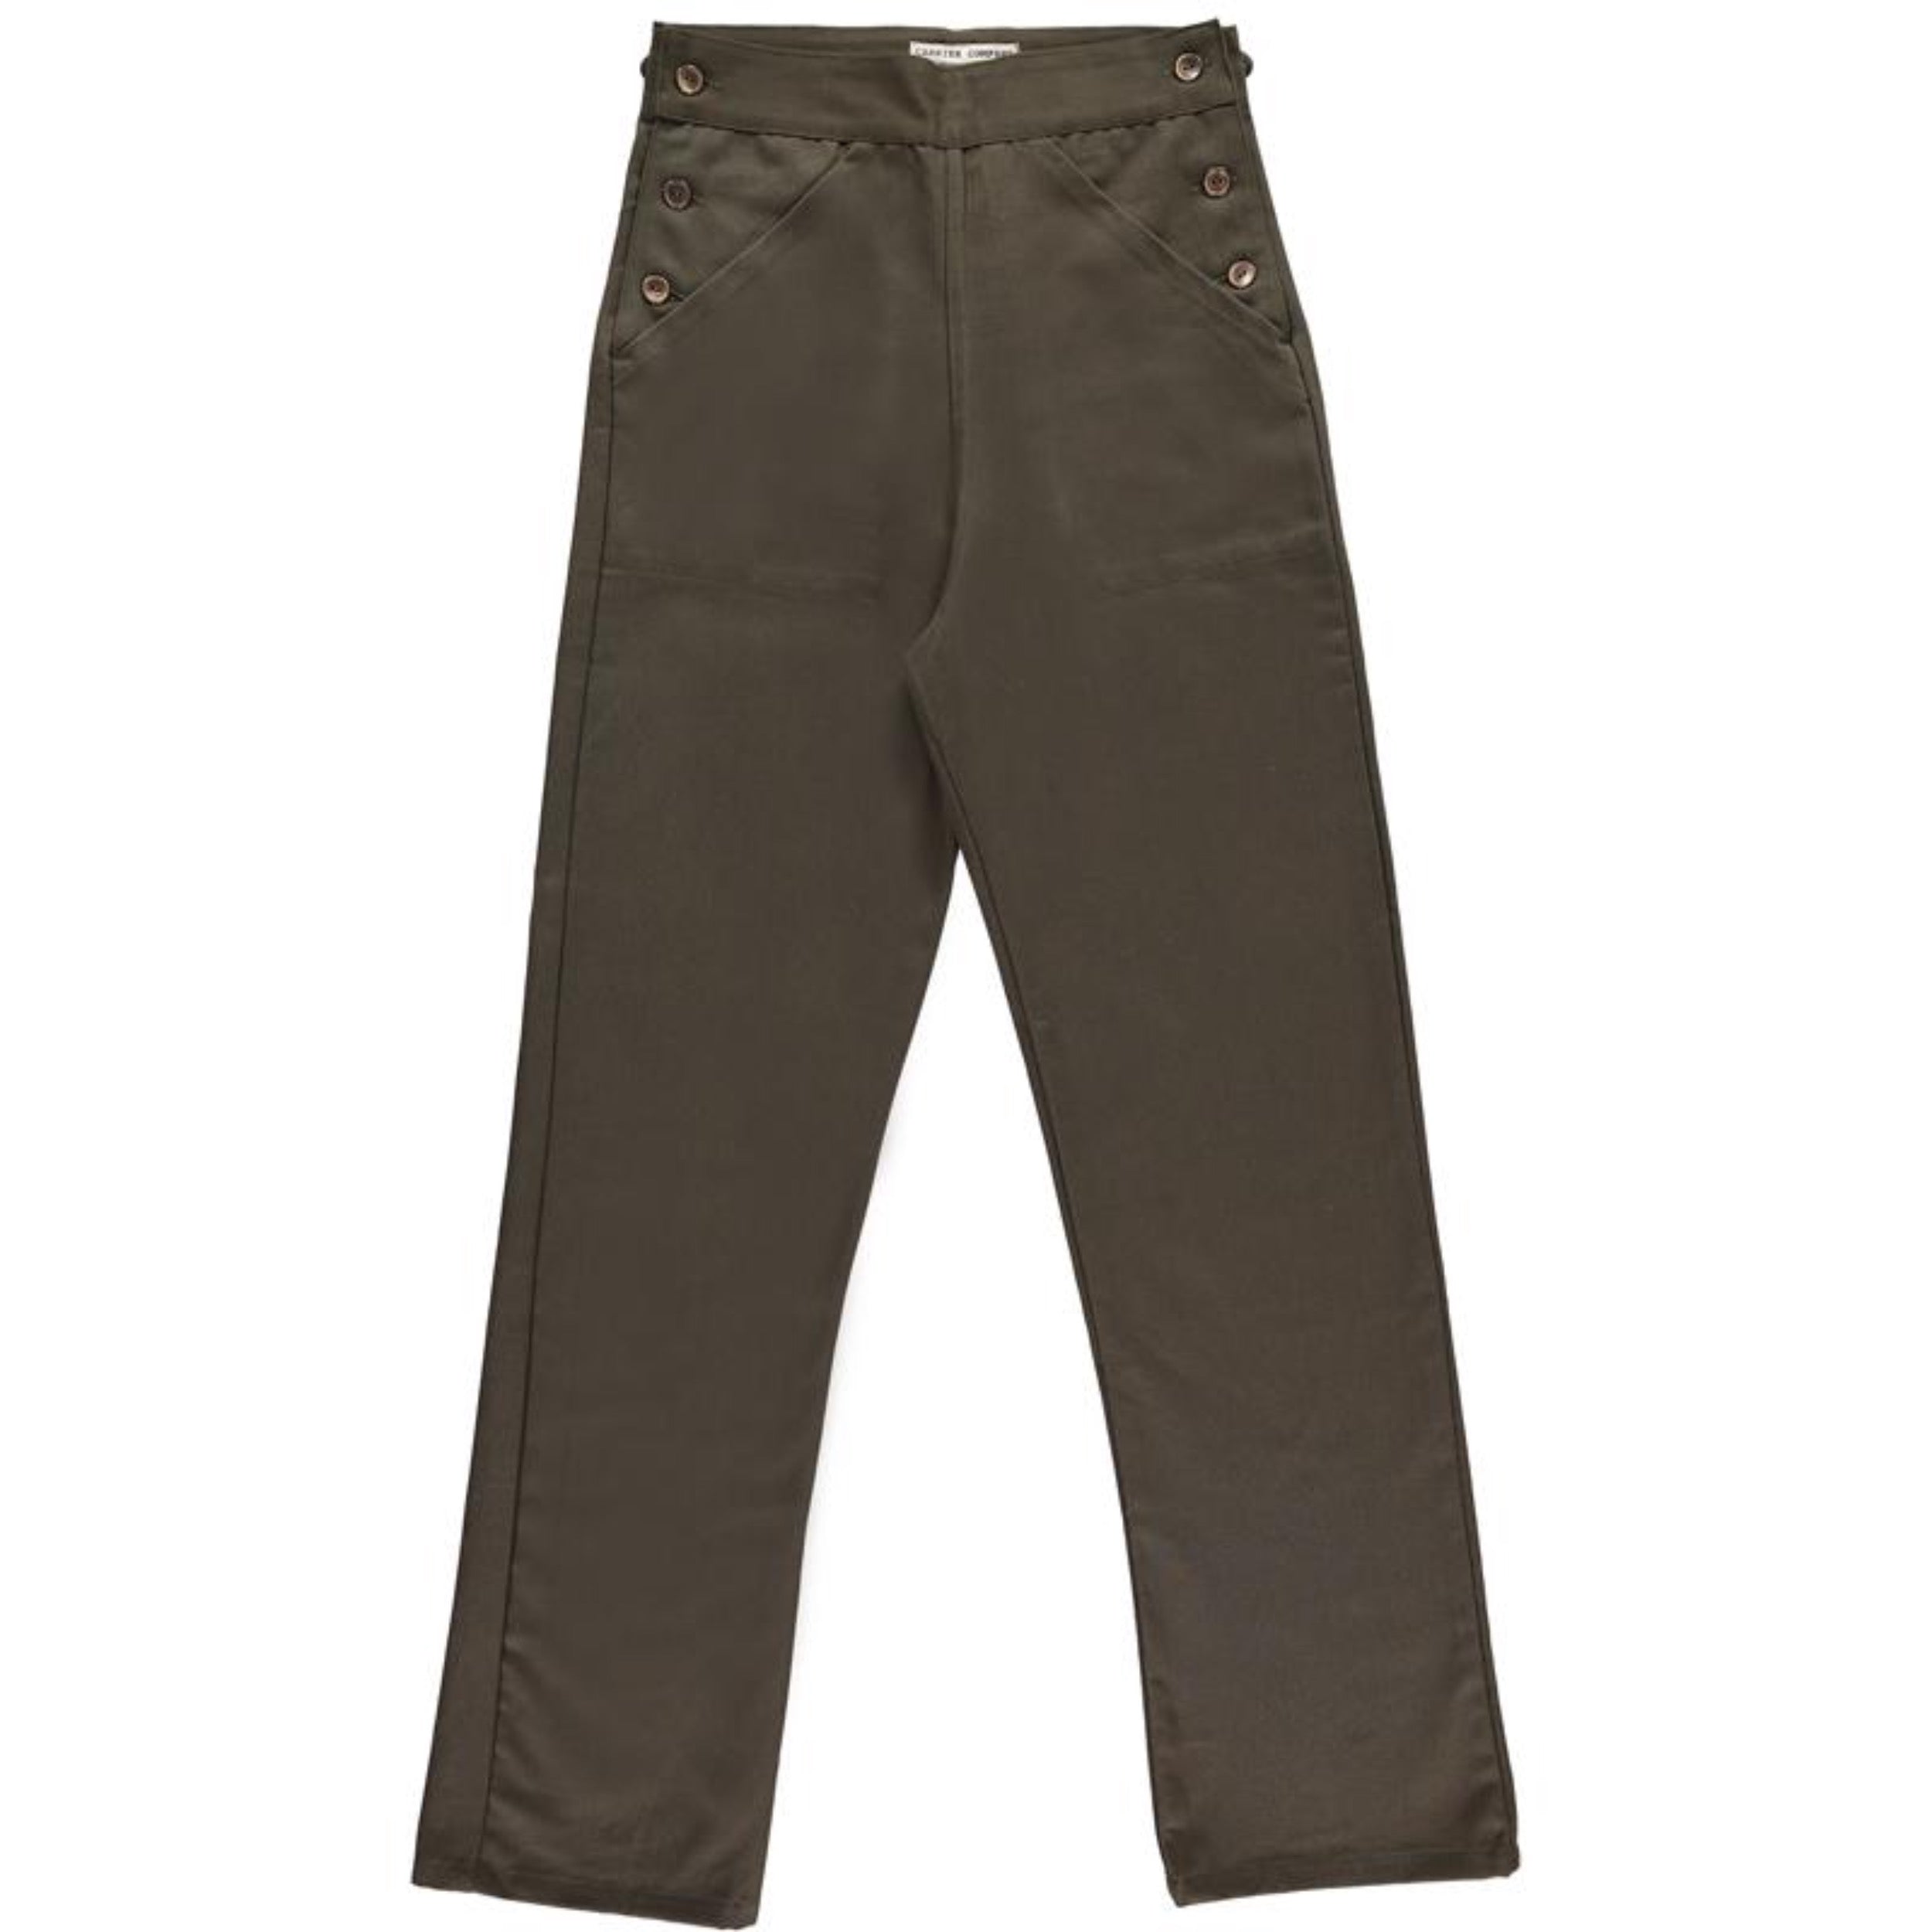 Carrier Company Women's Work Trouser in Olive